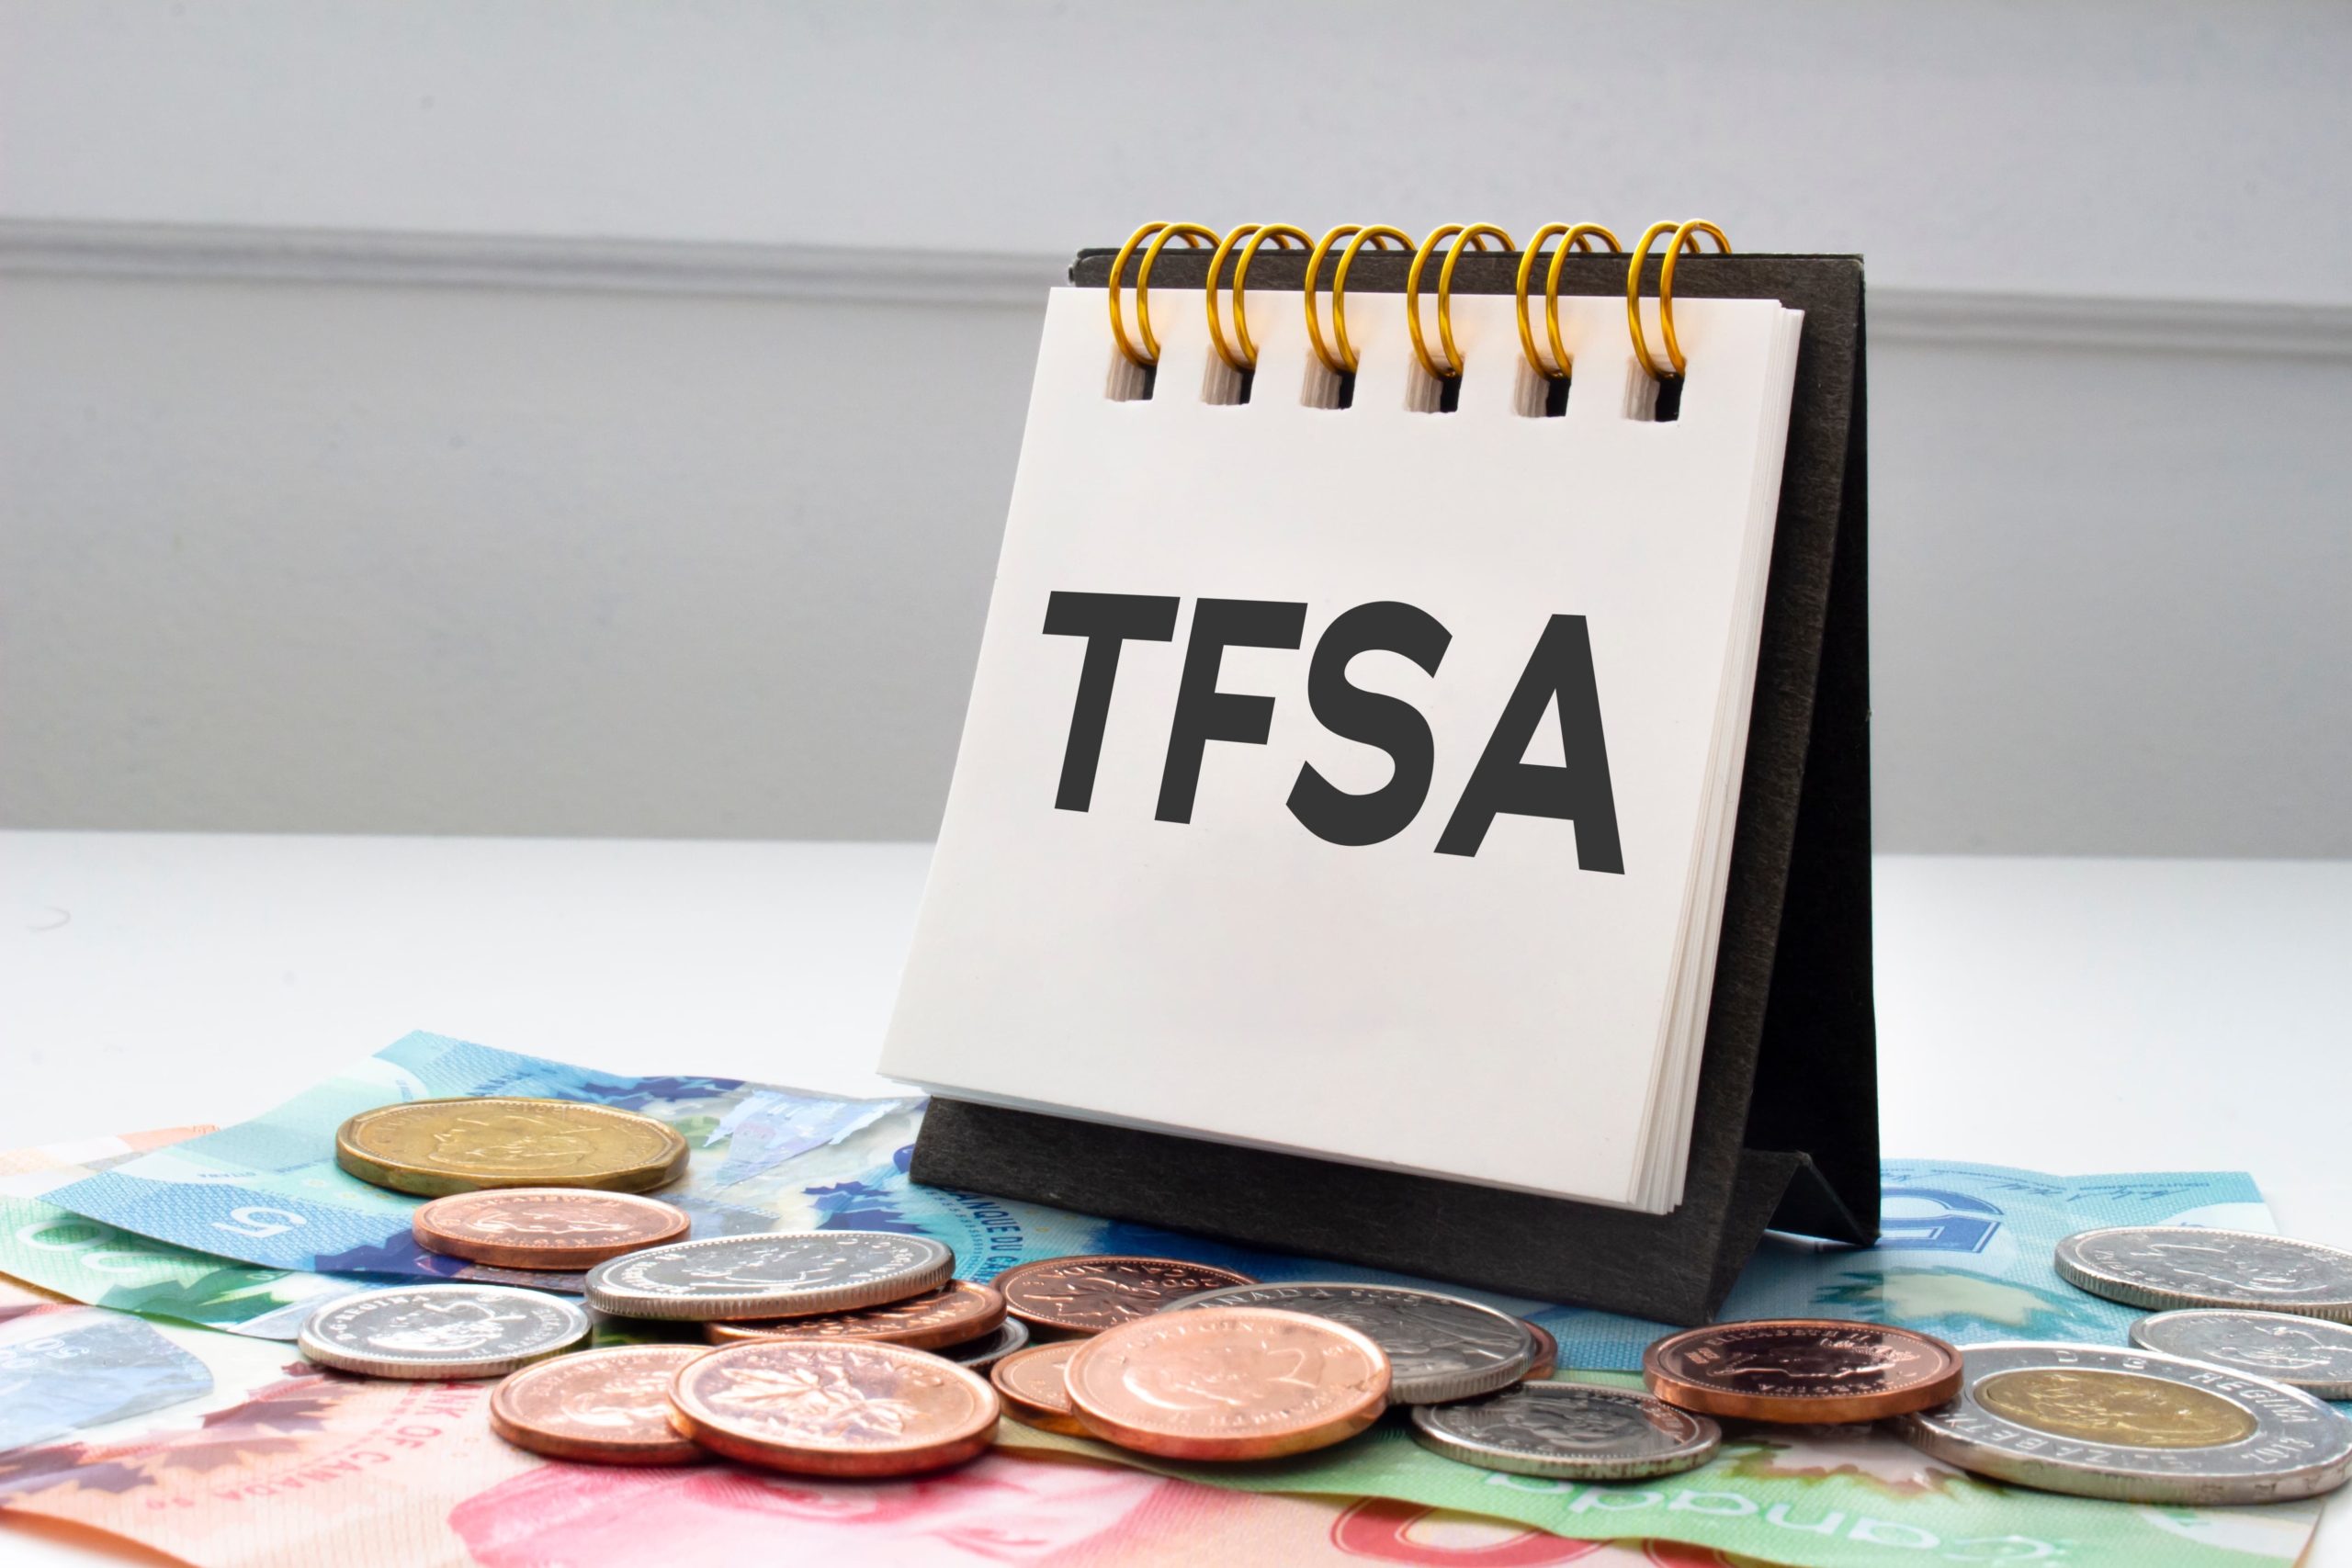 TFSA letters on notebook with coins and bills 